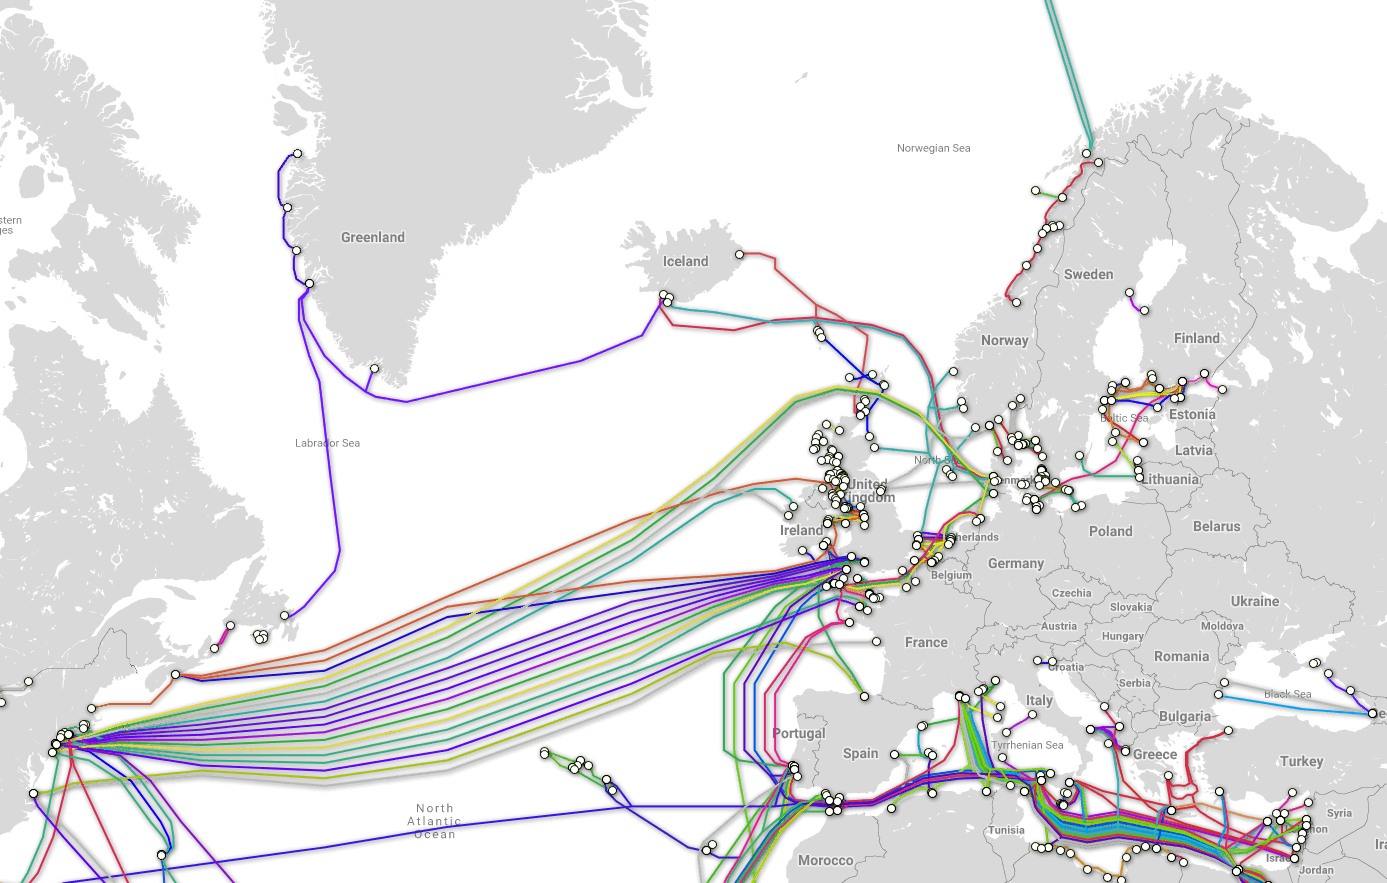 Europe Undersea Cable Map